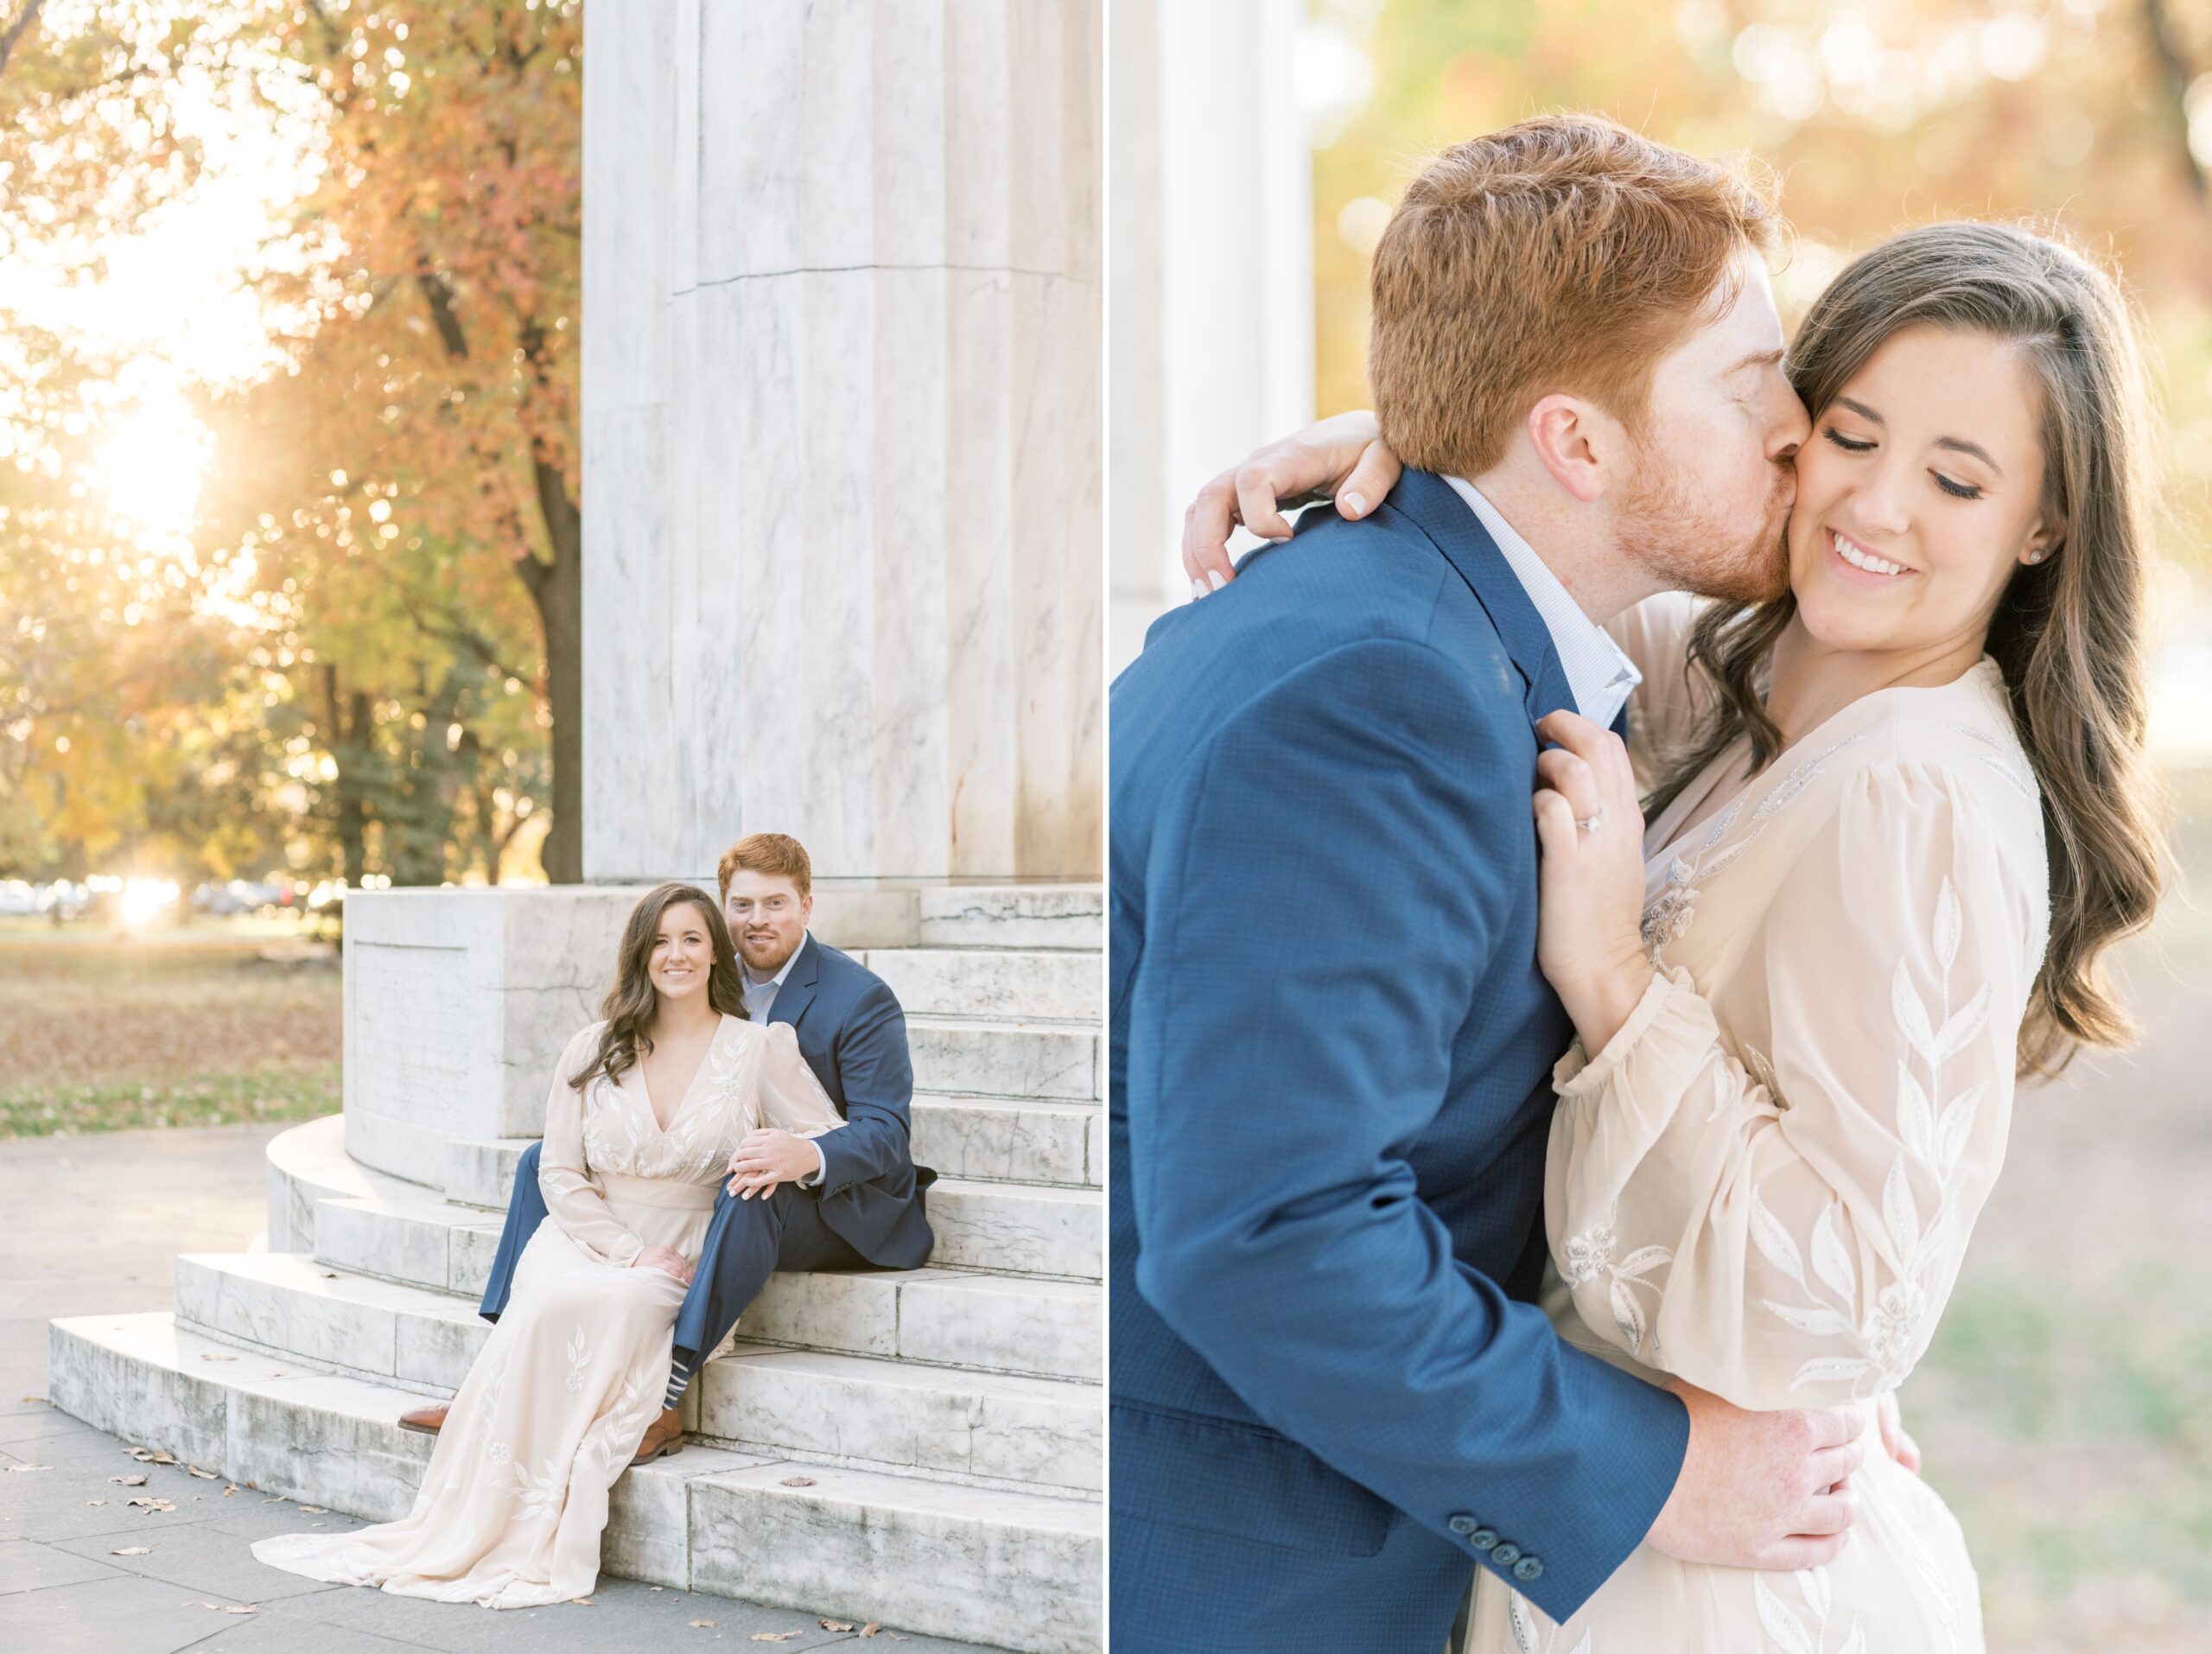 A chic sunrise engagement in downtown Washington, DC at the National Mall.